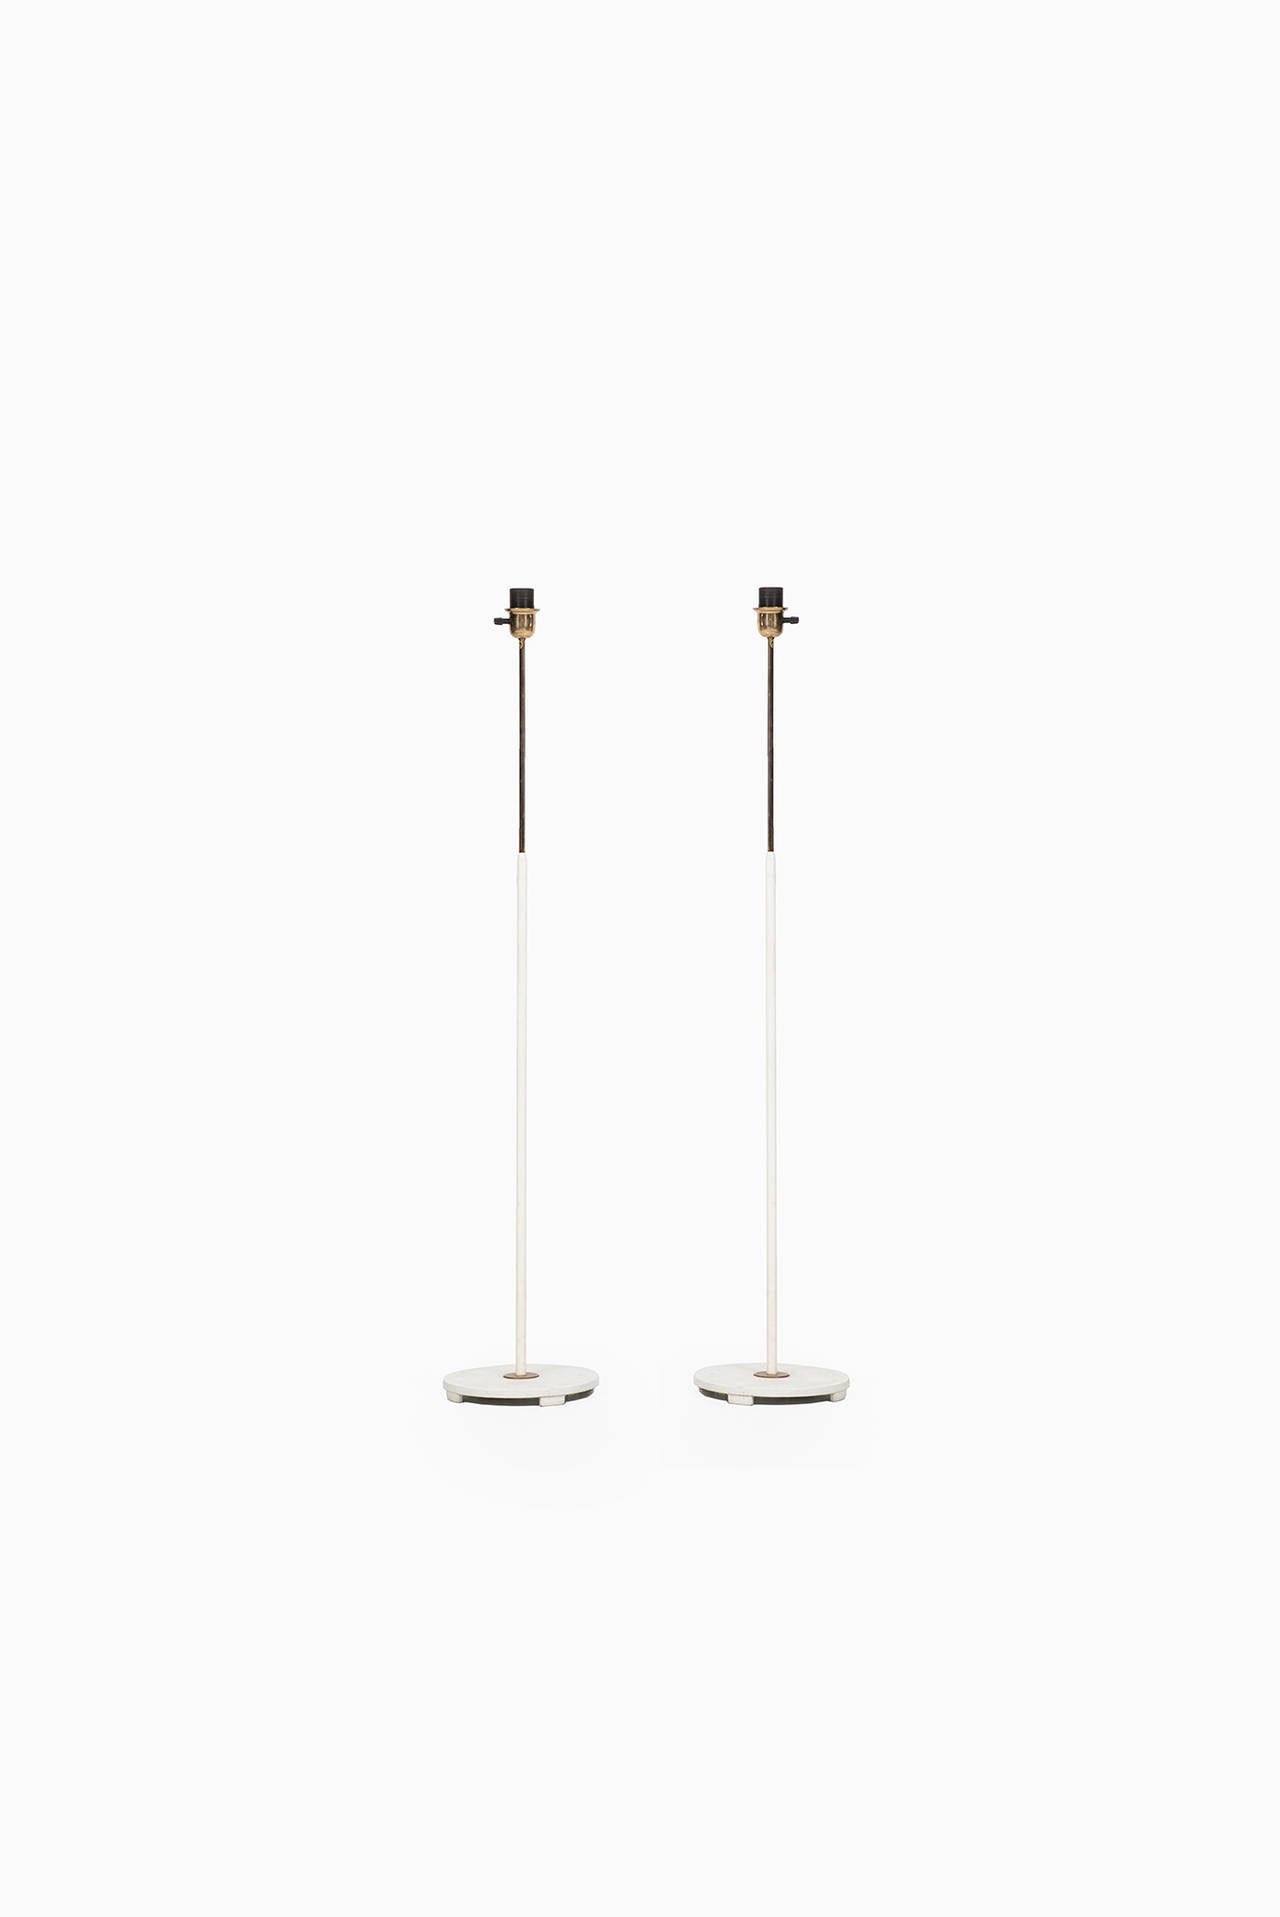 A pair of white lacquered floor lamps with brass details produced by ASEA in Sweden. Please note that these floor lamps are being sold without any lamp shades.